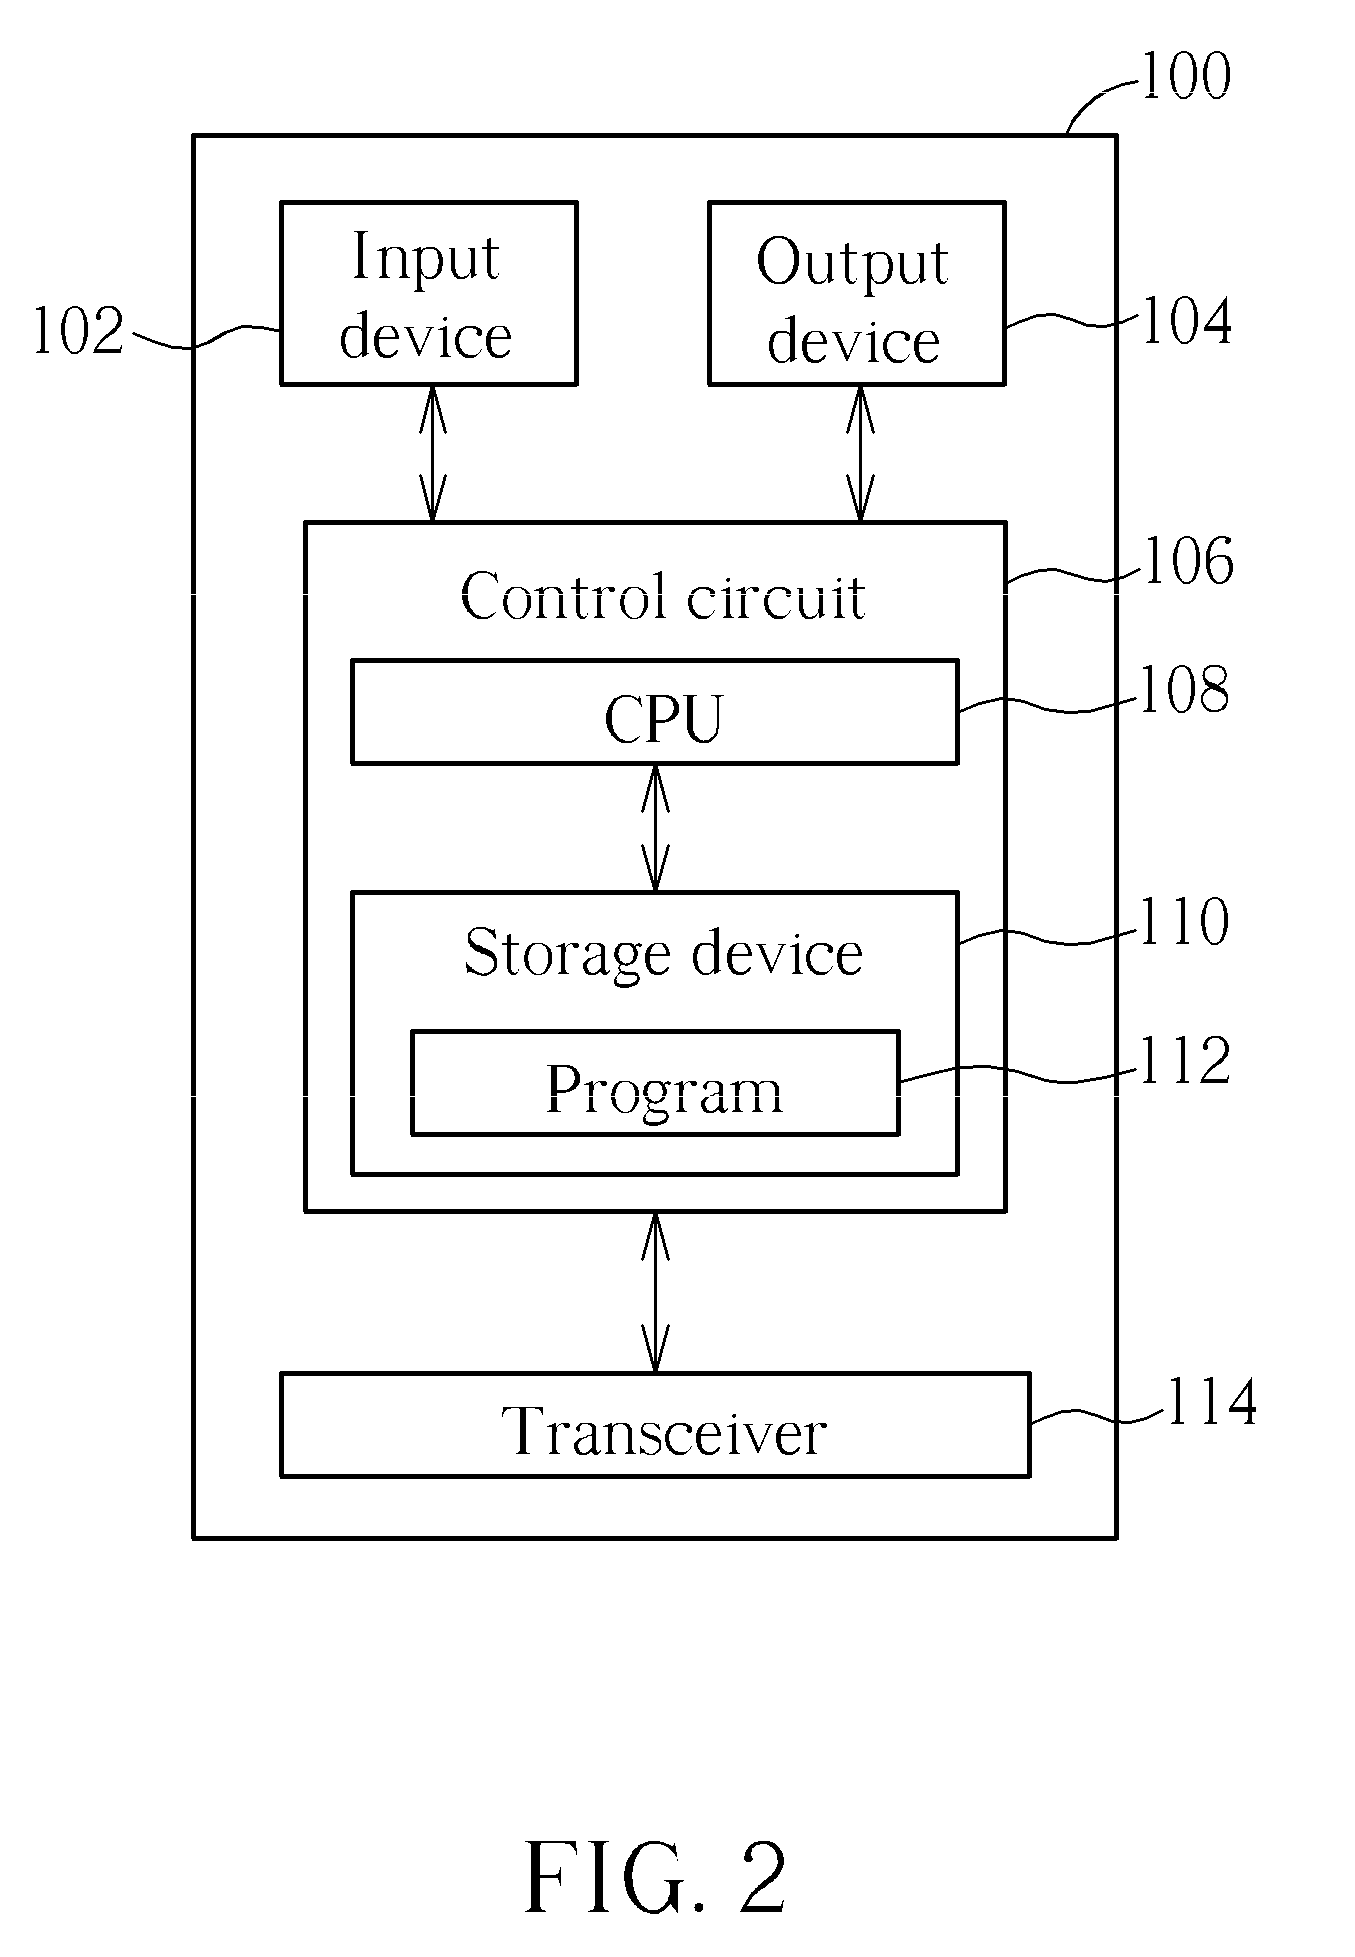 Method of Receiving Signaling and Related Communication Device